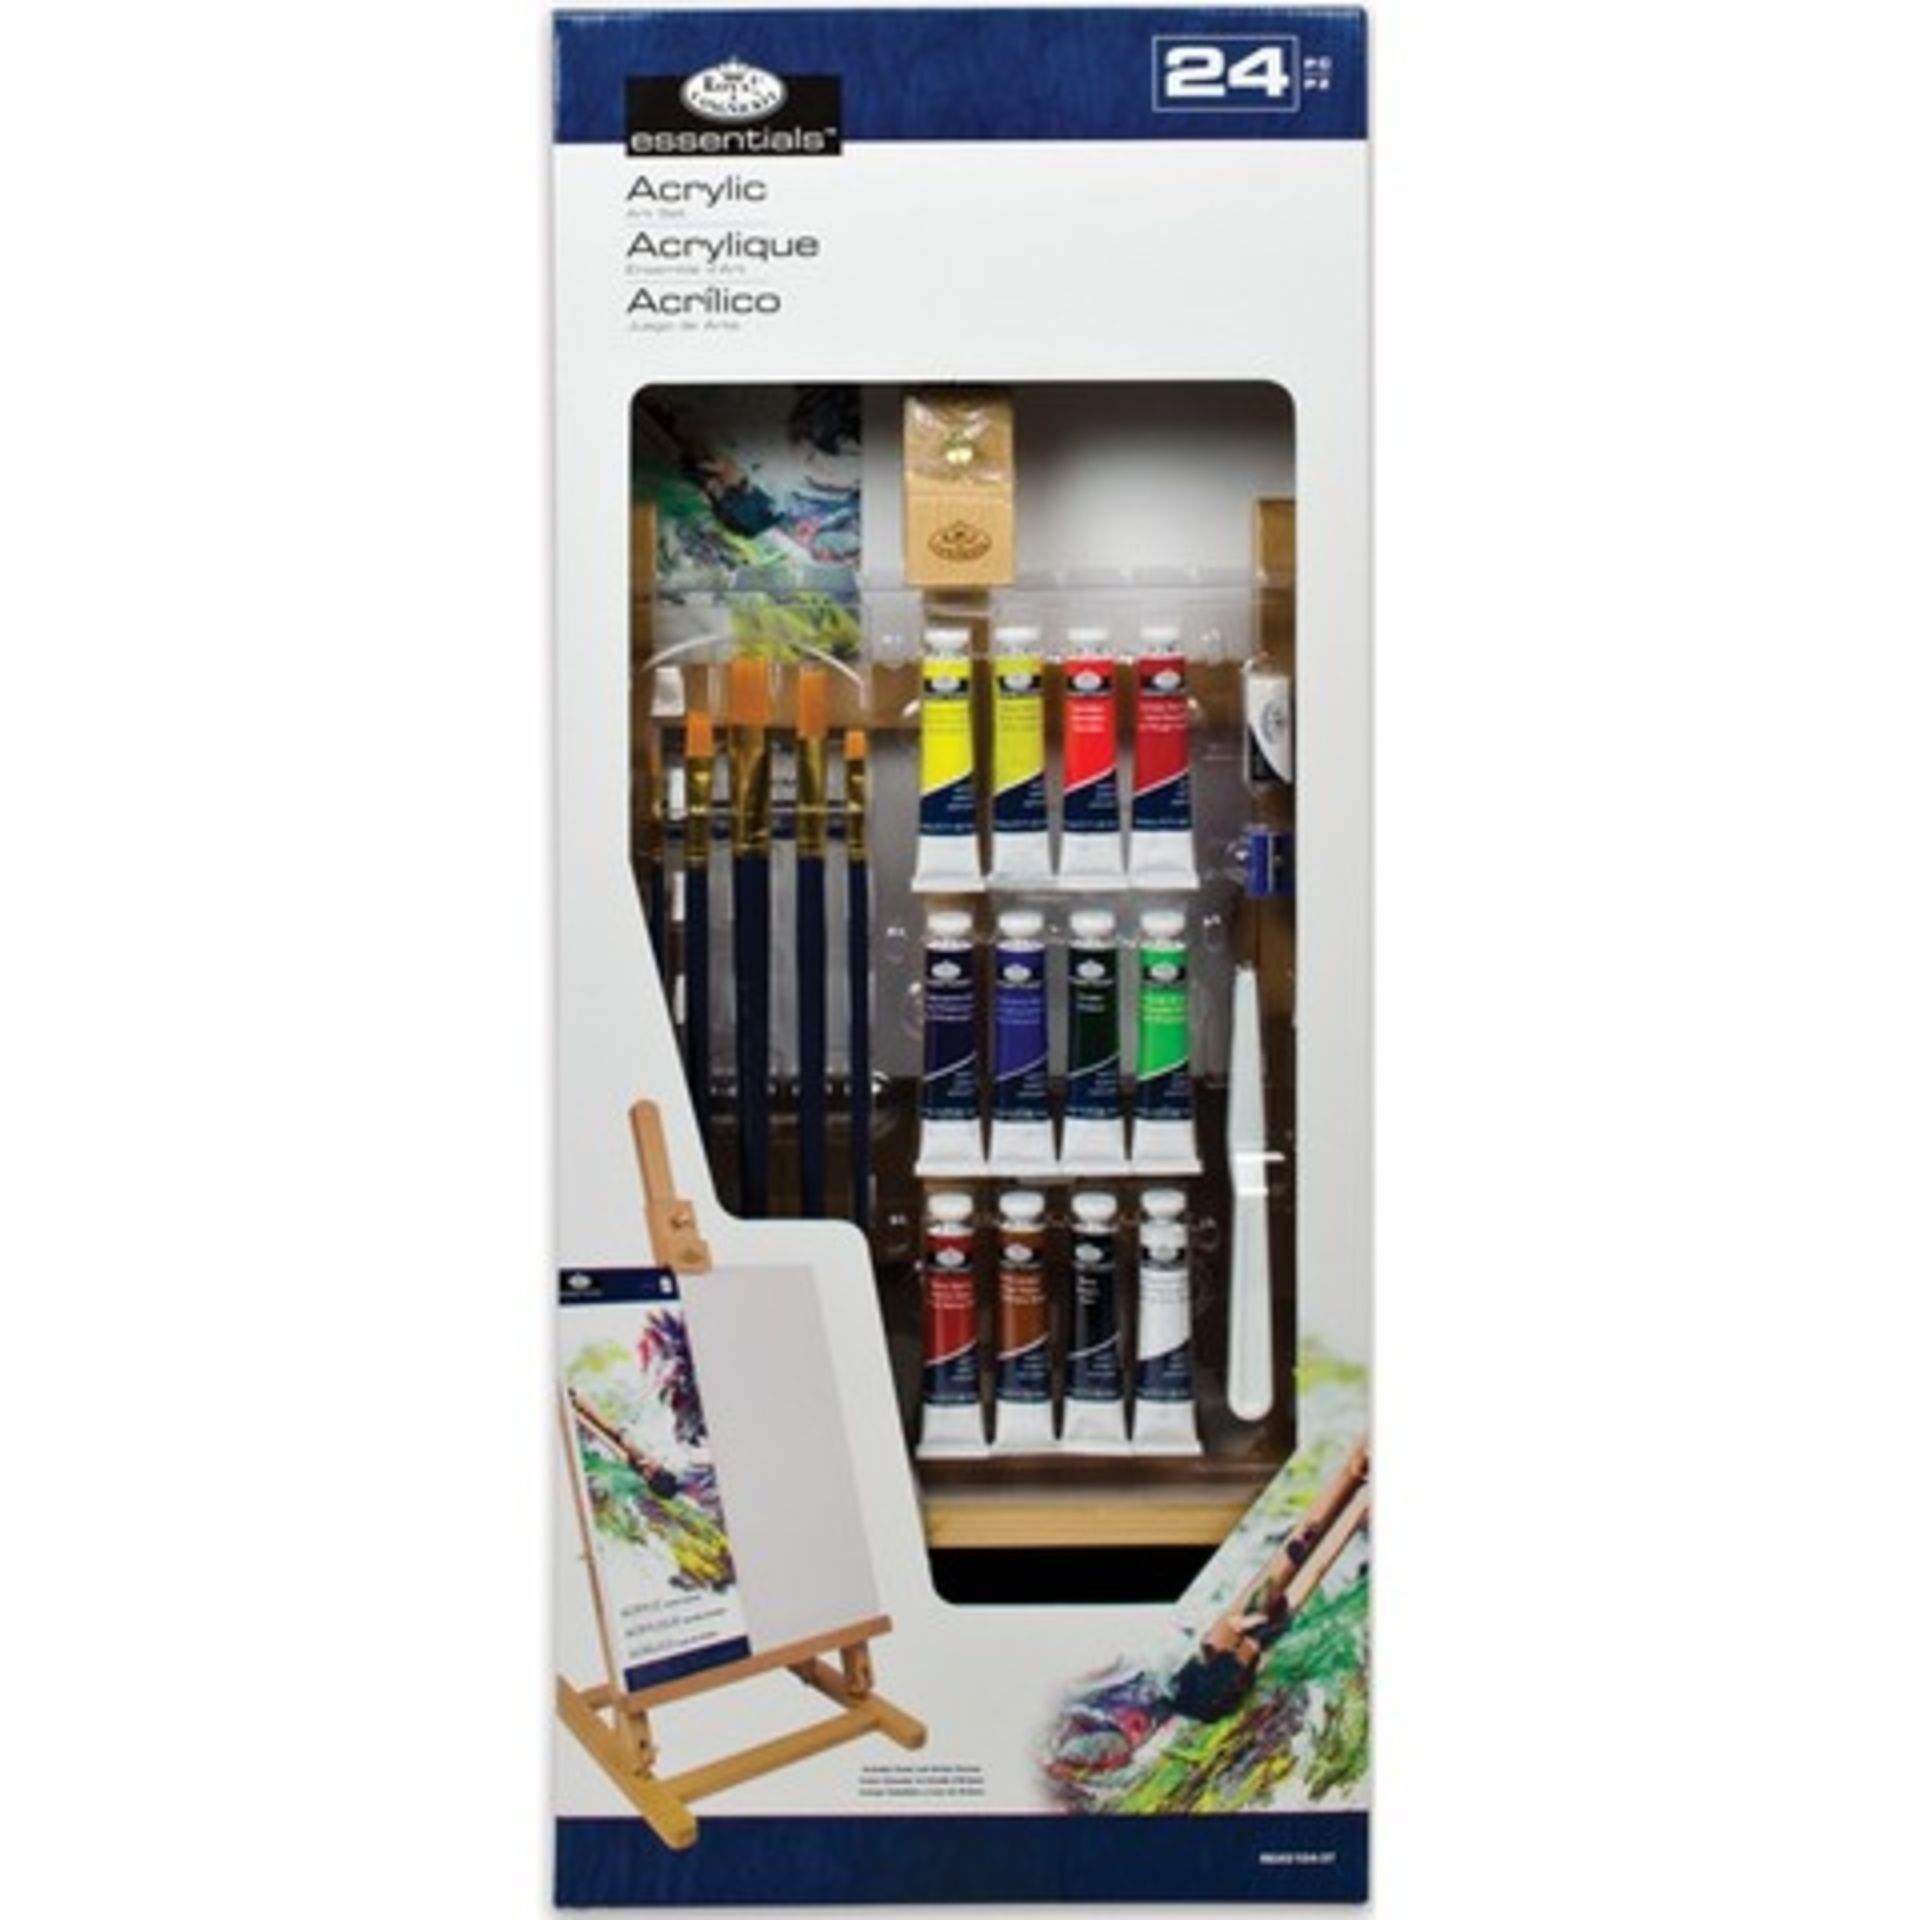 V Brand New Royal Langnickel 24 Piece Acrylic Paint Set inc Easel - 12 Acrylic Paints - 6 Gold